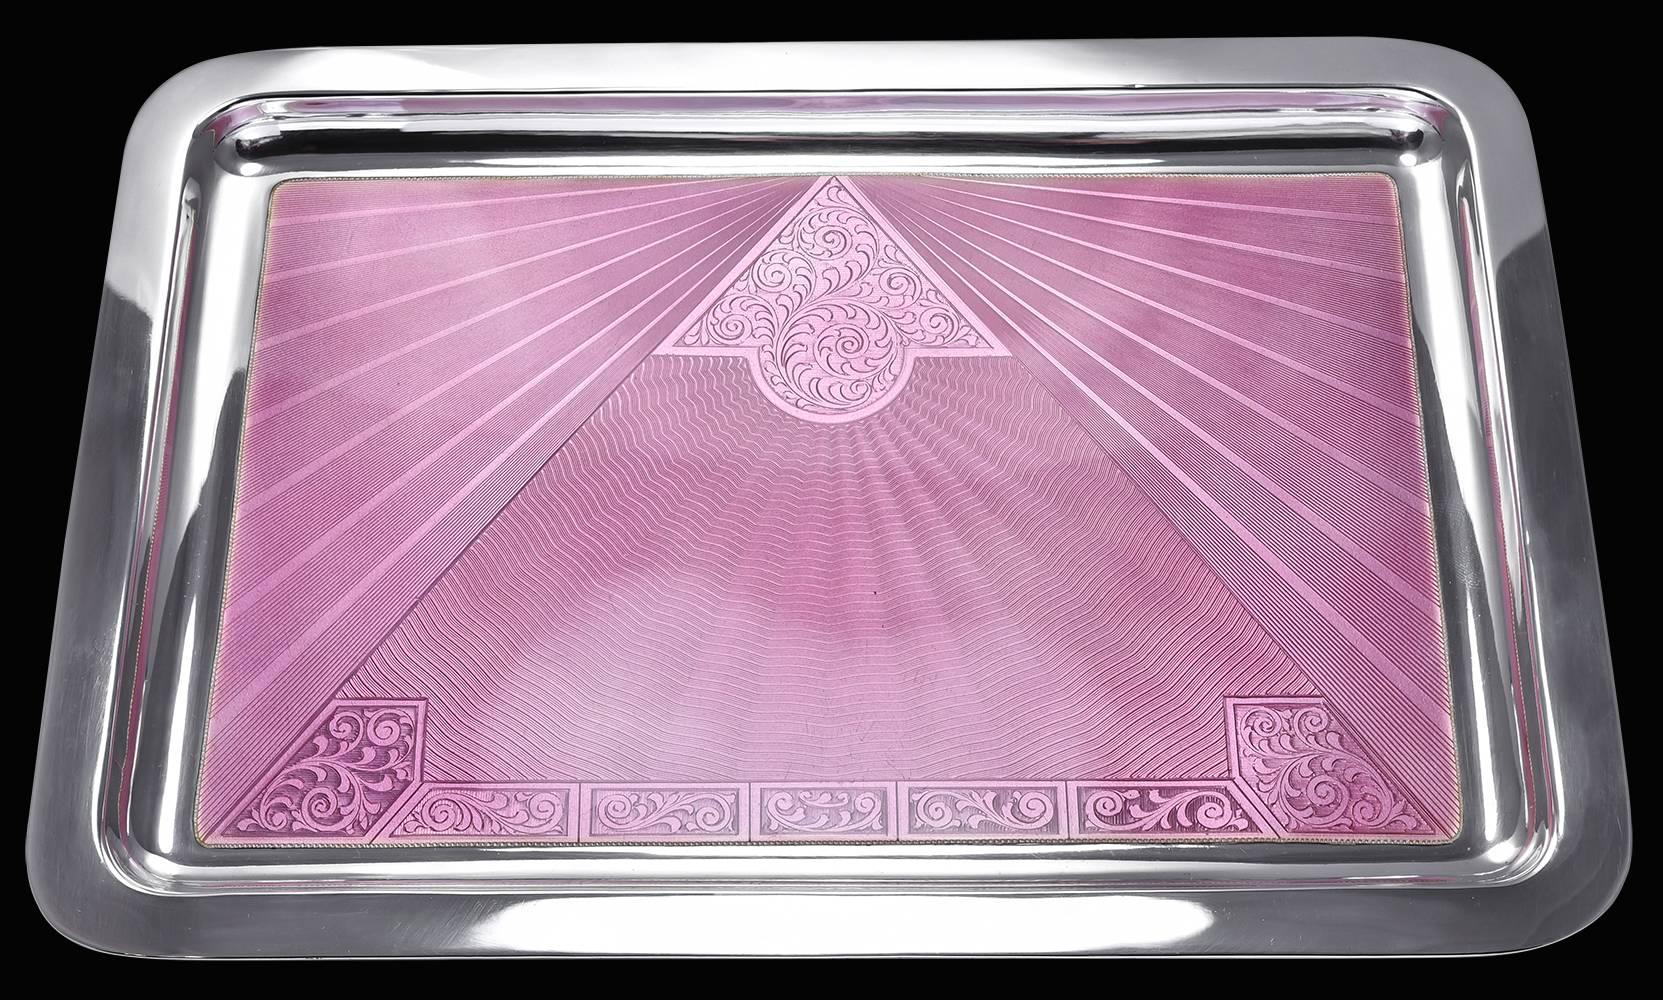 Most superior guilloche enamel and sterling silver tray.  Sensuous swirls of pink enamel, set off with radiating engine-turned lines. Beautifully conceived and executed. 11